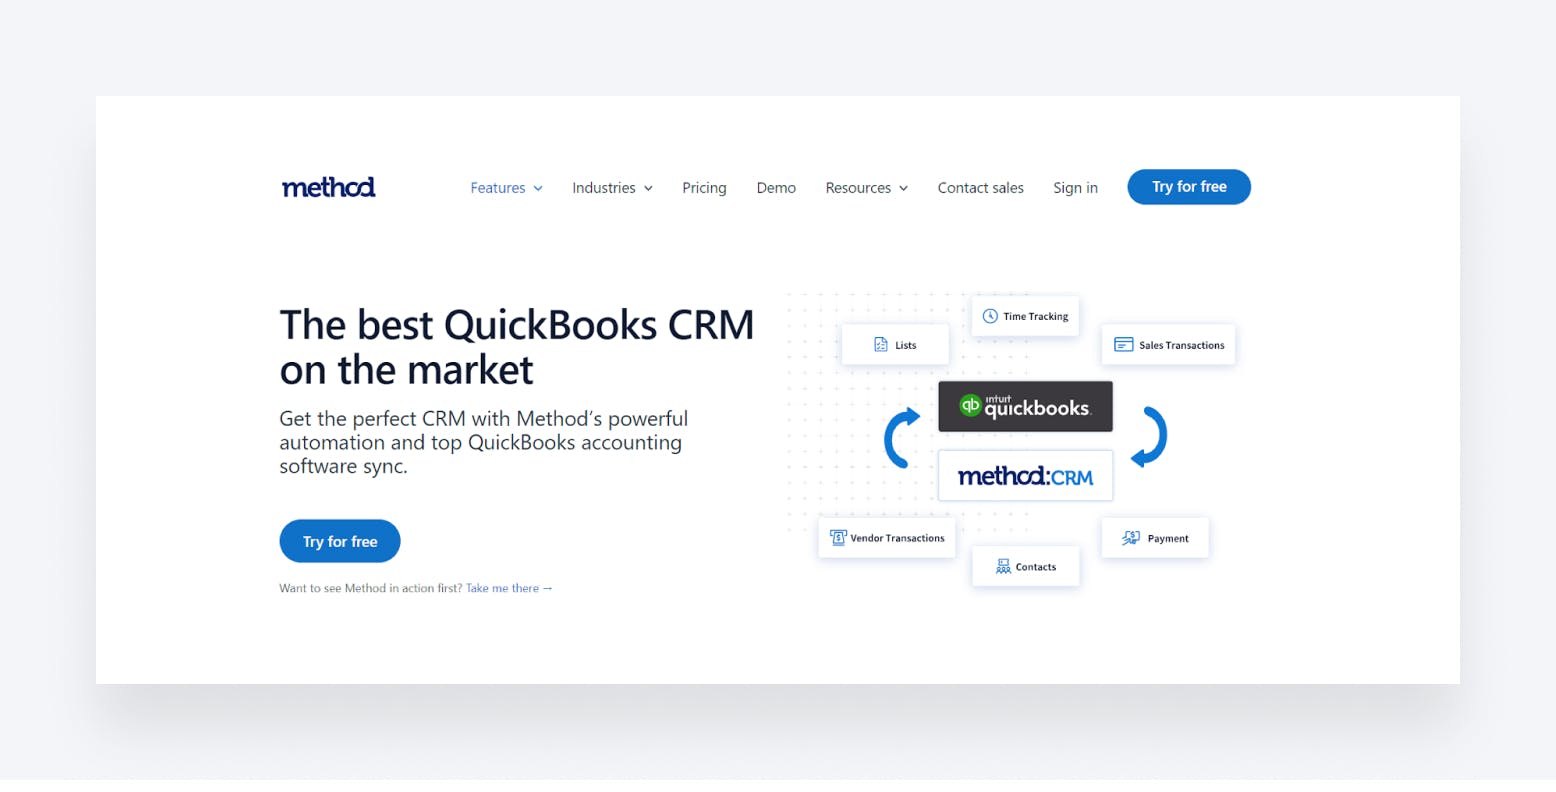 Method’s CRM page